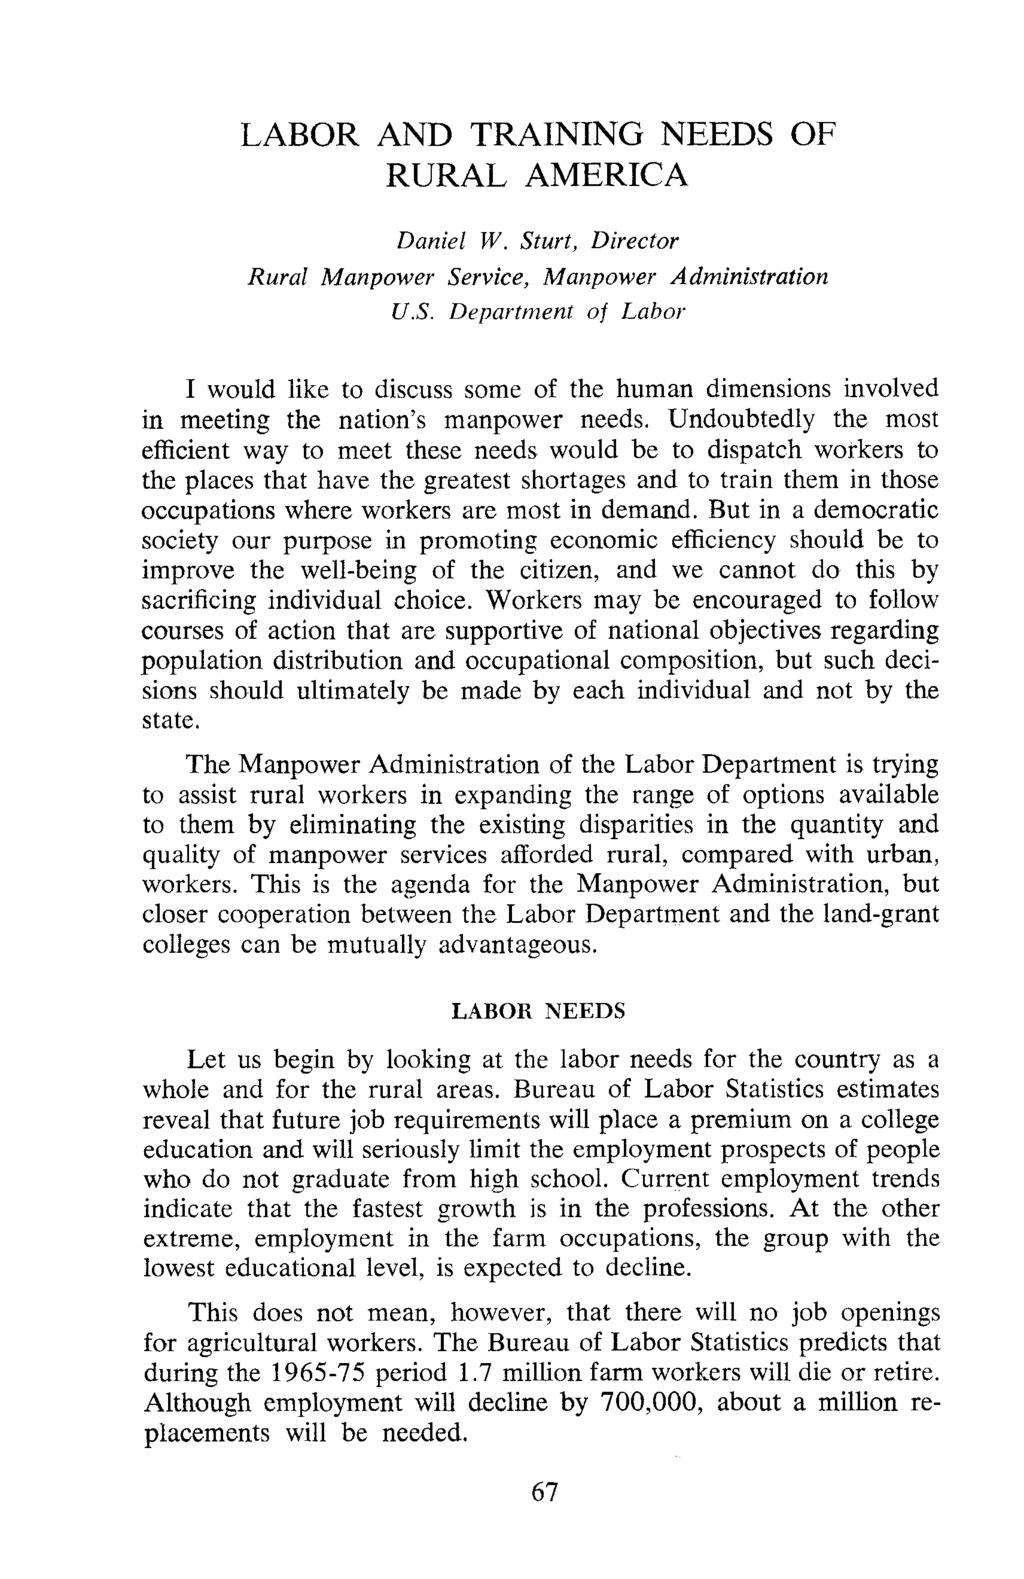 LABOR AND TRAINING NEEDS OF RURAL AMERICA Daniel W. Sturt, Director Rural Manpower Service, Manpower Administration U.S. Department of Labor I would like to discuss some of the human dimensions involved in meeting the nation's manpower needs.